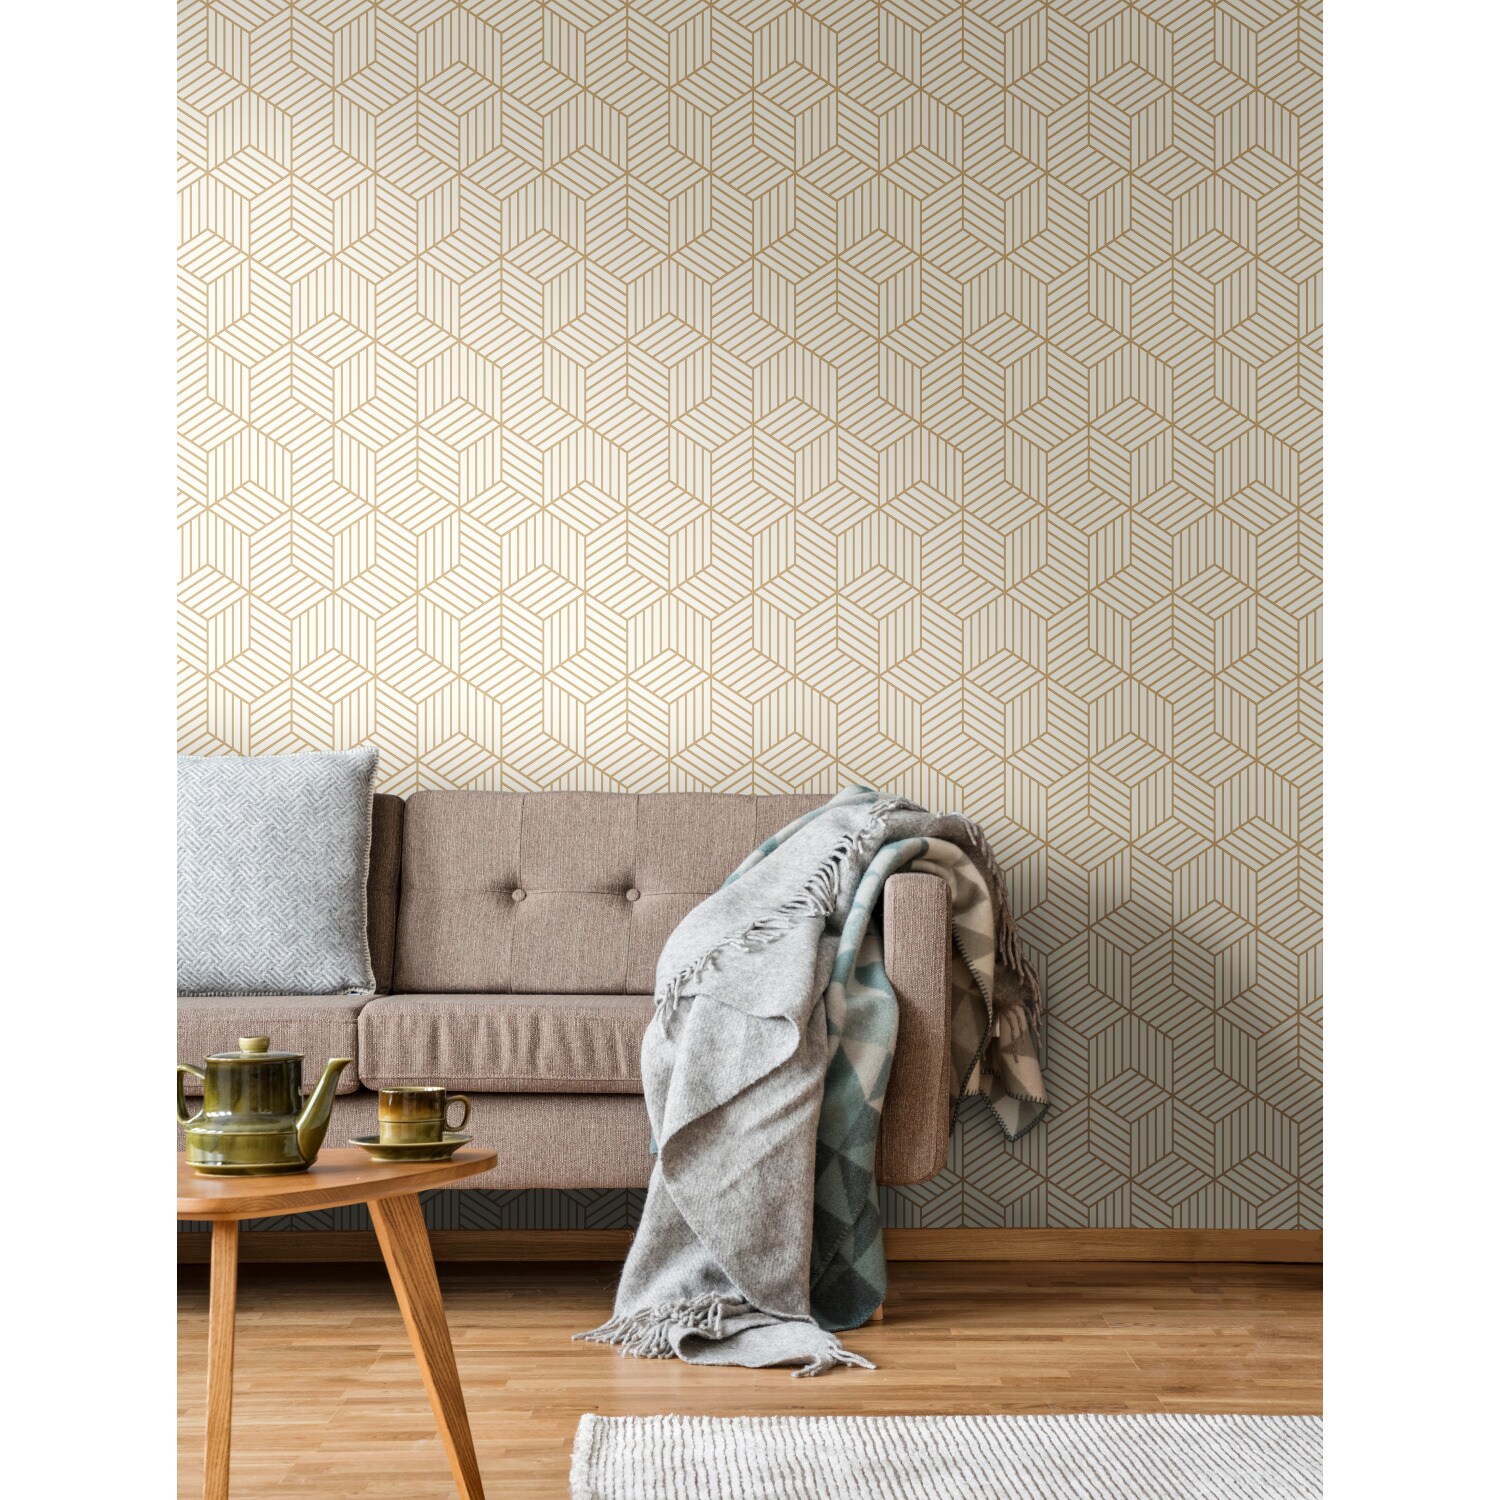 Gold and White Geometric Wallpaper Peel and Stick Wallpaper Hexagon  Removable Self Adhesive Wallpaper Gold Contact Paper for Cabinets Geometric